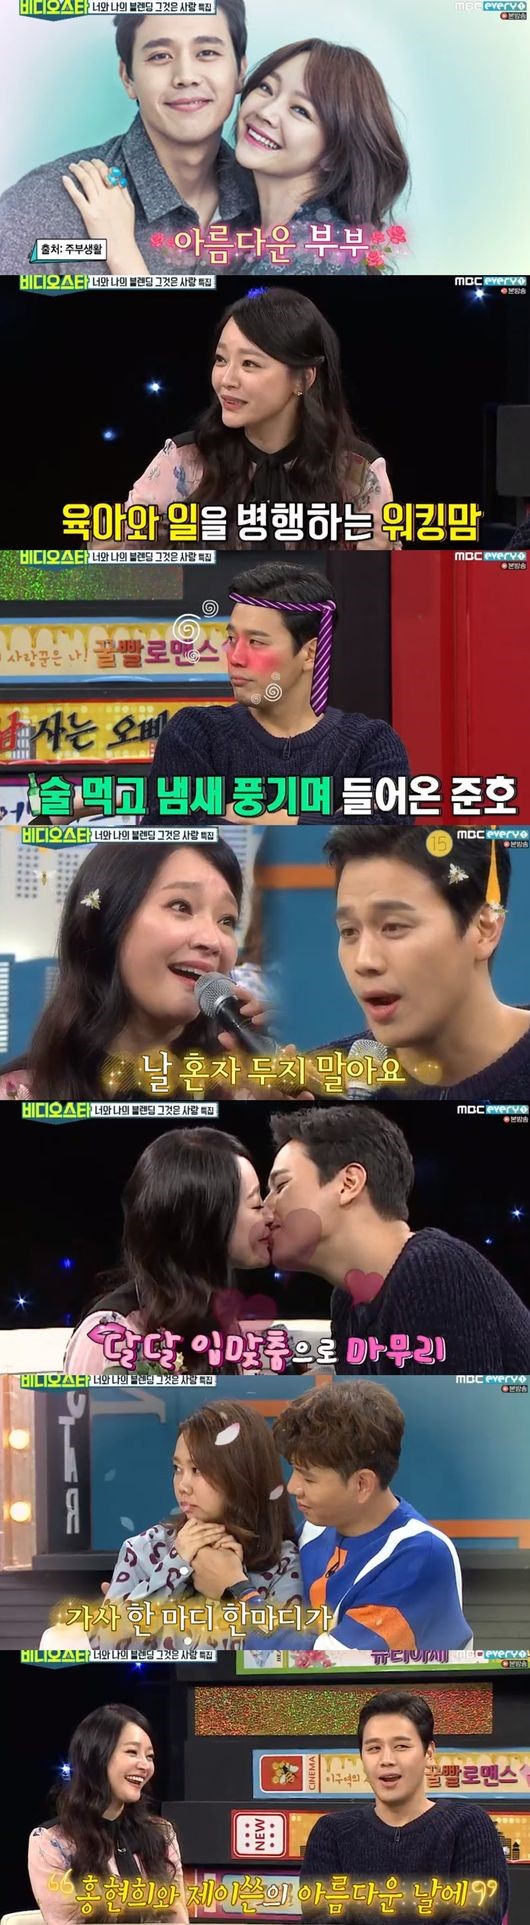 Kim So-hyun and Son Jun-ho, Jayson and Hong Hyon-hee, both of whom gave a big laugh as they showed off their candid gestures.MBC Everlon video star broadcast on the 13th 8 years old kenko couple Kim So-hyun - Son Jun-ho, newly married couple Hong Hyon-hee - Jay writer appeared.Asked about accepting husbands complaints, Son Jun-ho said: I hope my wife is comfortable, she doesnt show anyone for eight years, I wash myself when I sleep, and Im eating before I get up.I am diligent, but I am more diligent than I am. Kim So-hyun said, At first, I met at the performance and I was stressed about that because I only saw stage makeup.When Im sick, I was scouring when I was in the shower when I was newlyweds, and I got scolded, which is content without MSG, Son Jun-ho said.Hong Hyon-hee and Jay-Won appeared three days before marriage; Jay-Won said, Is it right that I am marriage?I did not have any marriage thoughts until January of this year, but I announced marriage to my parents on Parents Day. Jay writes of Hong Hyon-hees charm: Its comfortable, its fun and funny, and Hyun-hee herself makes people feel comfortable and funny.I think its marriage opponents that a man feels comfortable, so I did the proposal first, he said.In fact, at the beginning, I wanted to hear that I was pretty, but I fought because I was comfortable, Hong Hyon-hee said.MC Park said, Hong Hyon-hee has been saying that she will marriage in October 2018 for three years, so she thought she was a hypothetical.But I really got marriage, he surprised everyone.Hong Hyon-hee said, I heard the radio and heard on a wonderful day in October.So I wanted to marriage in October and I wanted to marriage three years ago. Asked when Hong Hyon-hee looked the prettiest, Jay-Won smiled, Baby, its cute when you jump in.Hong Hyon-hee and Jay wrote marriages in five months after meeting.Asked about the past Thumbnail, Hong Hyon-hee said: On the day of the announcement of the marriage, I got a call from Jo Se-ho: Its good to be done with this.Nam Chang-hee has no contact at all. I heard that Yang Se-chan continues to ask about his love story through his brother-in-law.In response to MCs asking them to send video letters to the past, Hong Hyon-hee said, Im so sorry. I already missed the car.I hope you will meet a good woman, he laughed.Kim So-hyun said, I do not do well in front of my friend unless I am a mother.Im practicing musicals for 12 hours these days, so its too hard to wear a dress, but I want to do it, but I do not think I can live like this for too long. Son Jun-ho said, I have a time to endure my wife leaking out, and then I shout Oh! and laughed.Hong Hyon-hee gave Jay-Thun a card. Jay-Thun said, I was surprised that I never received a credit card from my parents.But Hong Hyon-hee gave me a card, he said.Asked why he was attacking the substance, Hong Hyon-hee said, I have it because I am a sister, it was such a bluff. I used to scratch once or twice, but Jay-Sun was not scratched at all.Personal prayers followed: Jay-Won perfected Hong Hyon-hees mother-in-law and father-in-laws vocal chords, while Son Jun-ho perfected IUs Pink God dance.At the end of the broadcast, Kim So-hyun Son Jun-ho and his wife, Hong Hyon-hee Jay, captured a beautiful celebration on Vidio Star screen with on a wonderful day in October